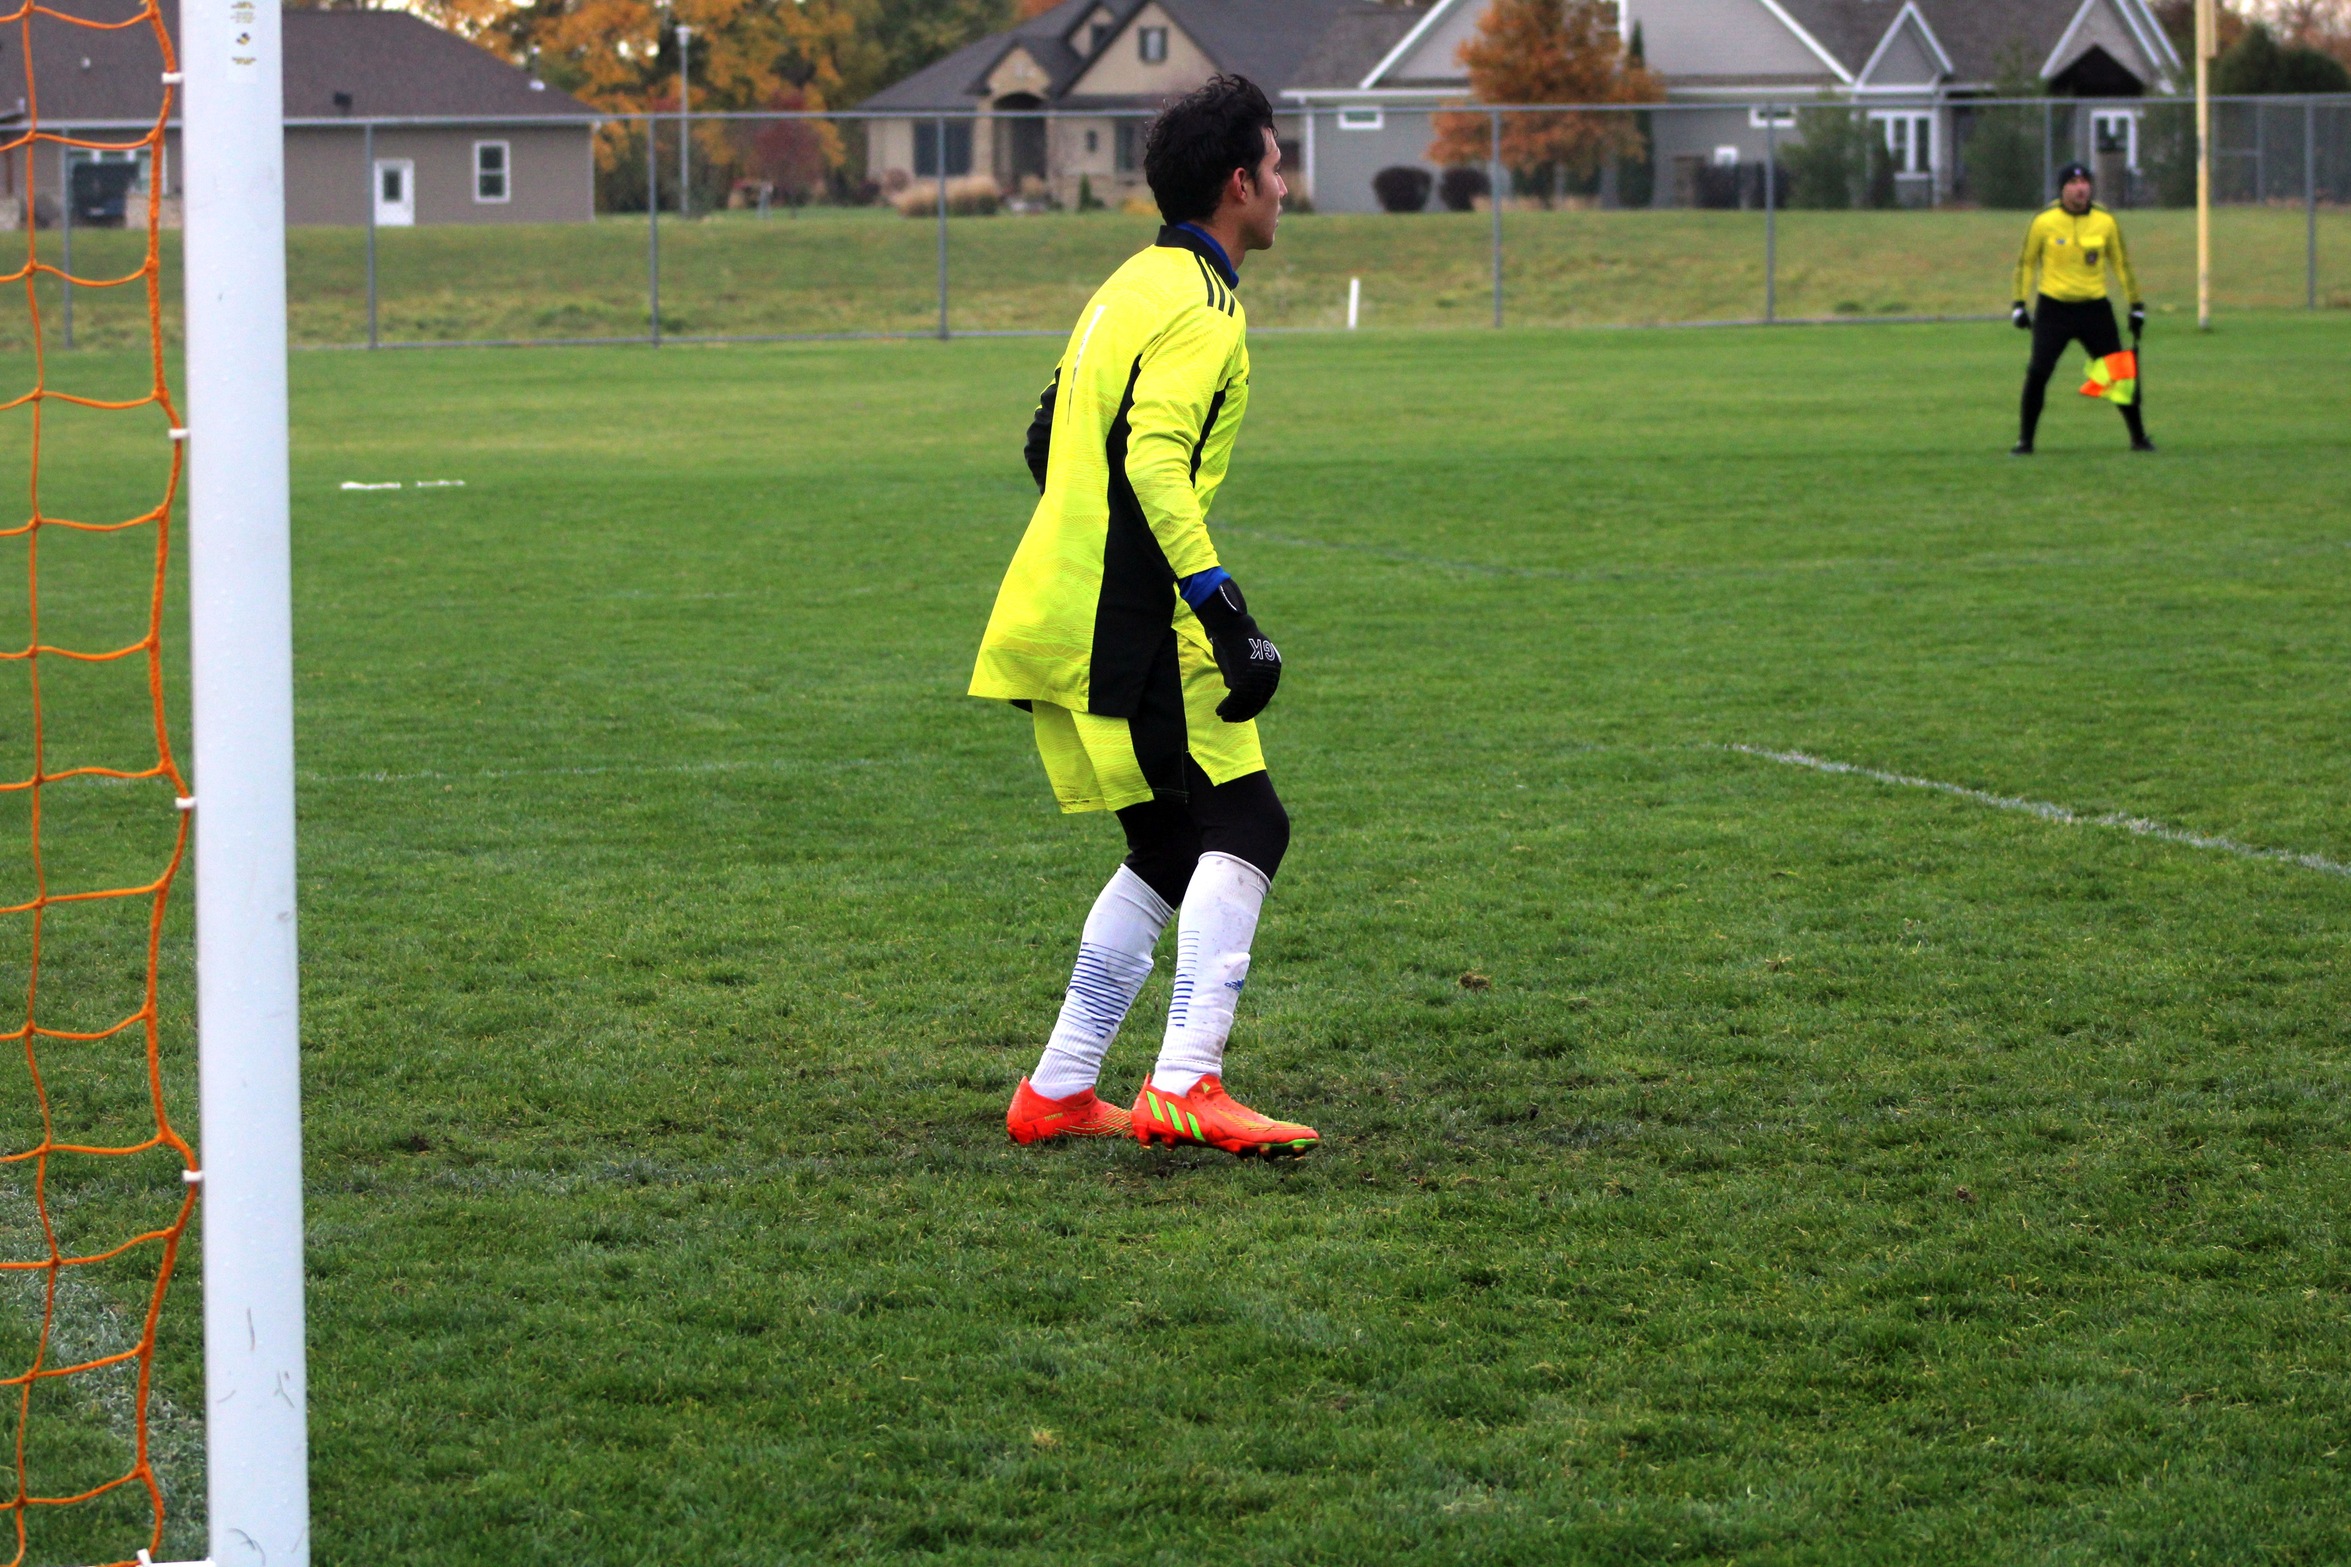 NIACC's Federico Figueredo was selected as the ICCAC Division II keeper of the week for the week of Oct. 17-23.